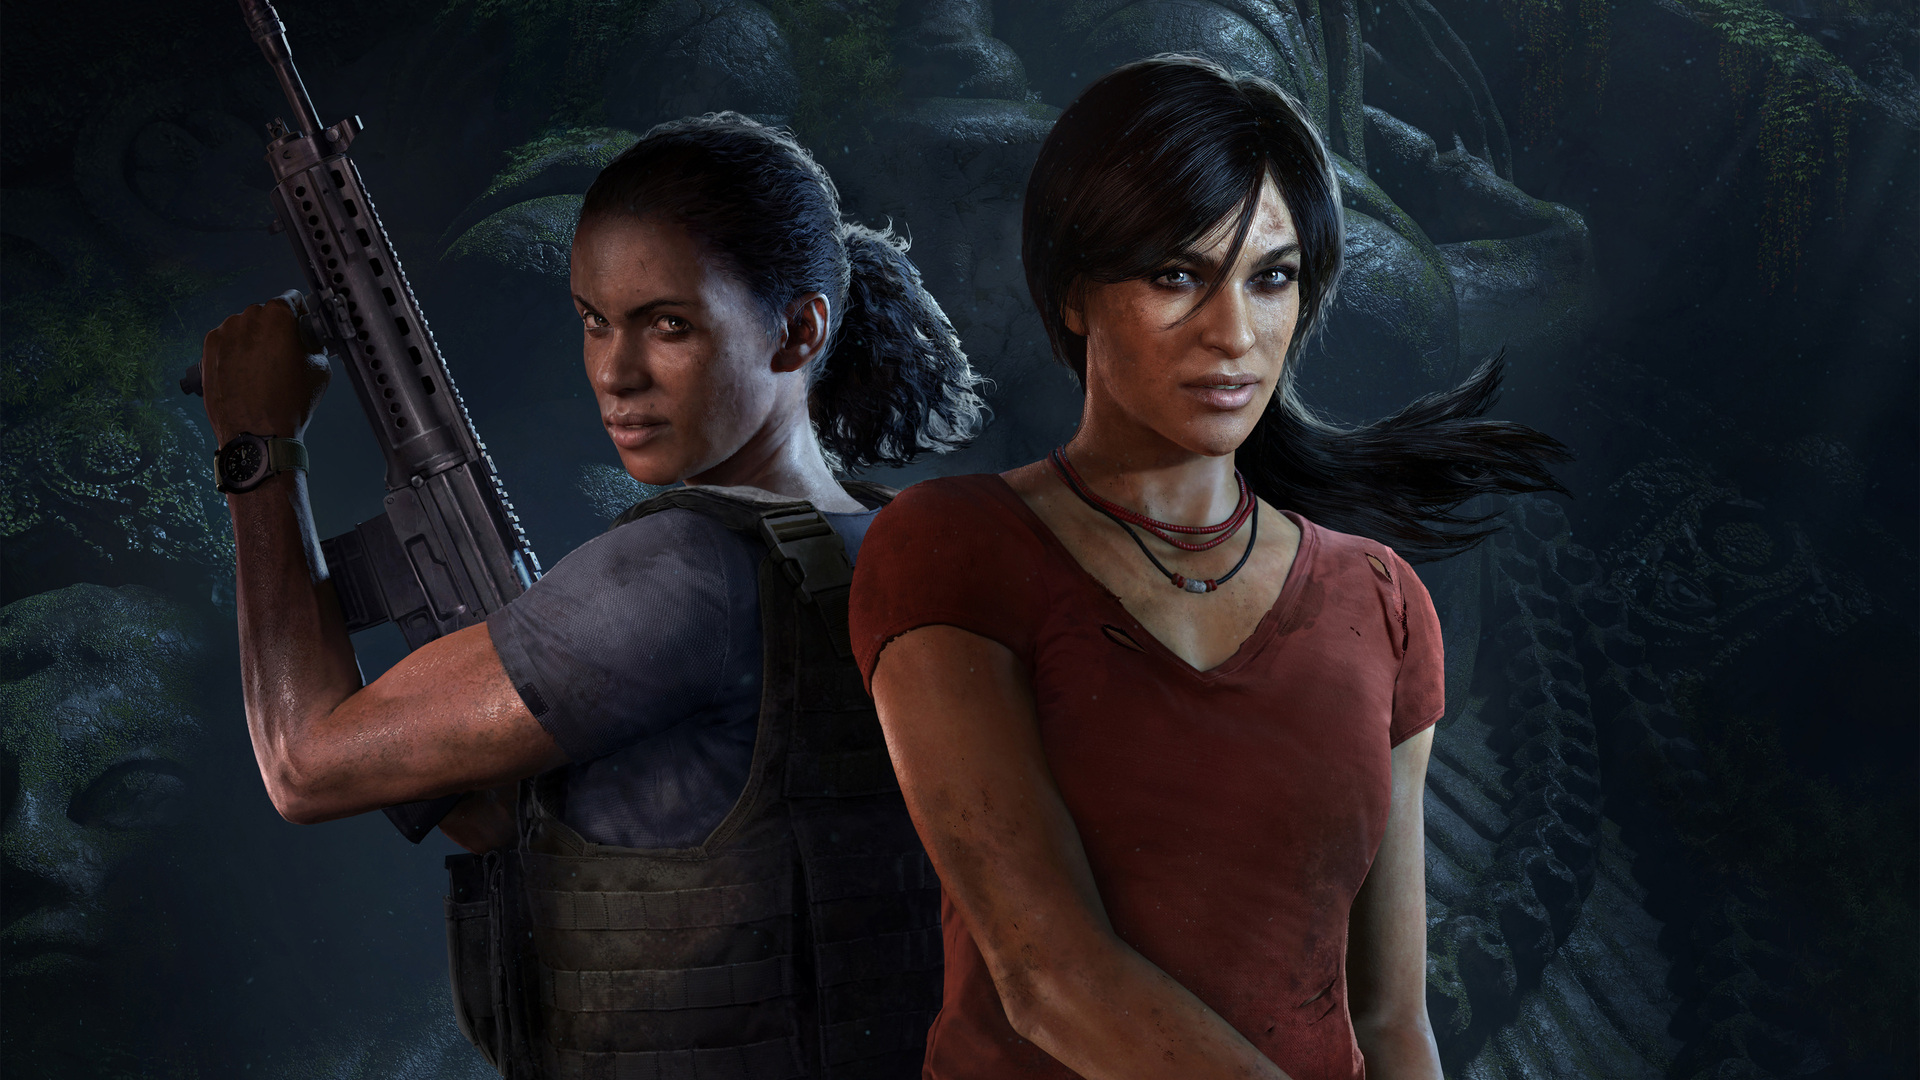 chloe-and-nadine-uncharted-the-lost-legacy-image-1920x1080.jpg